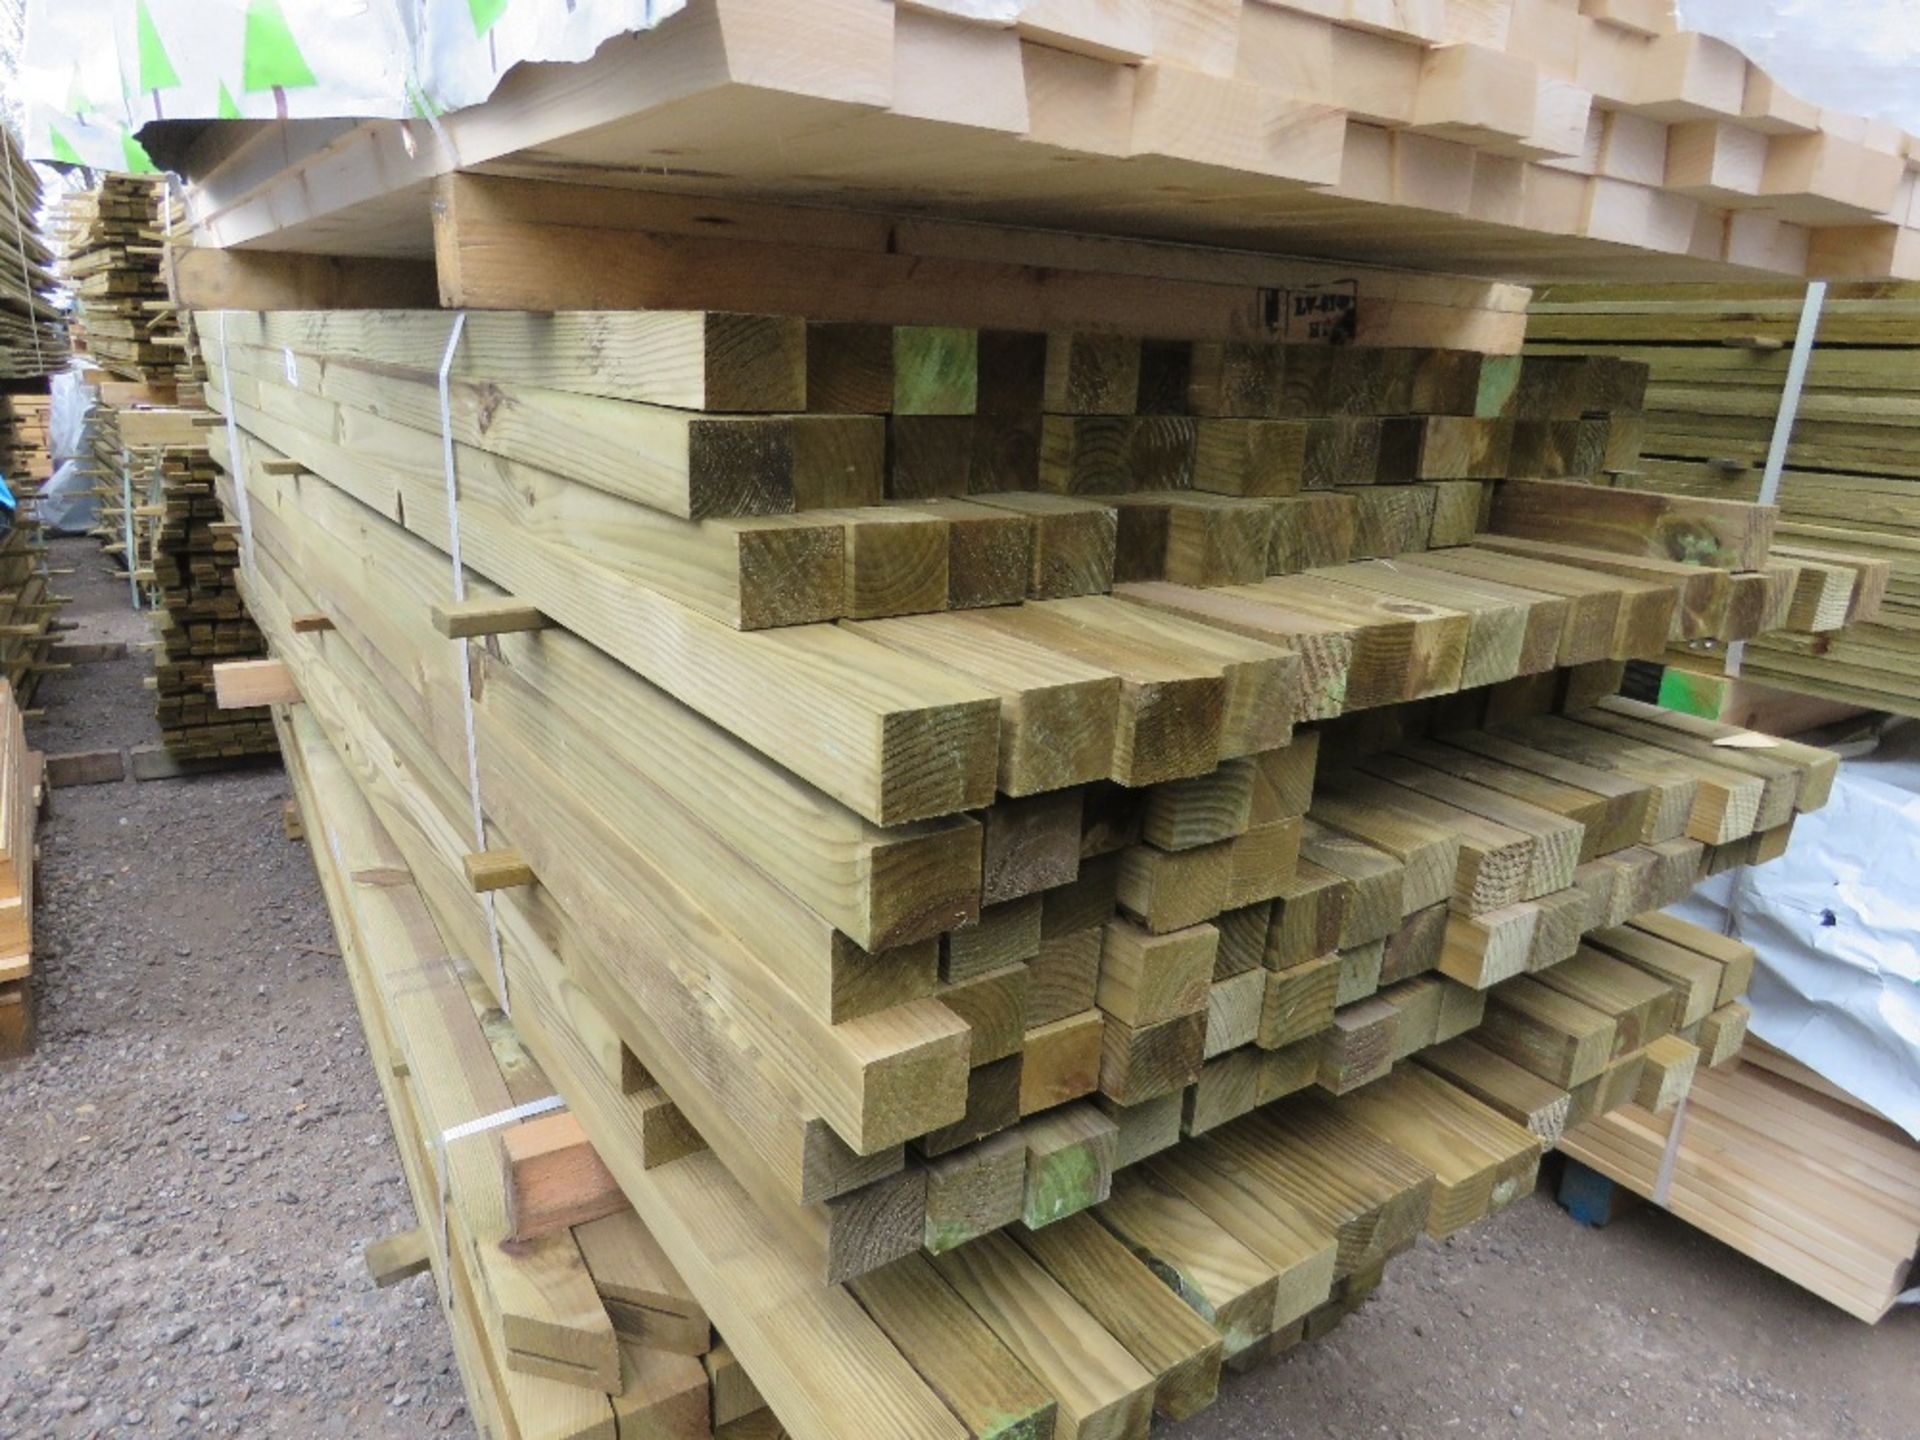 PACK OF TREATED TIMBER POSTS: 2.2-2.7M LENGTH 55MM X 45MM APPROX. 192NO IN TOTAL APPROX.